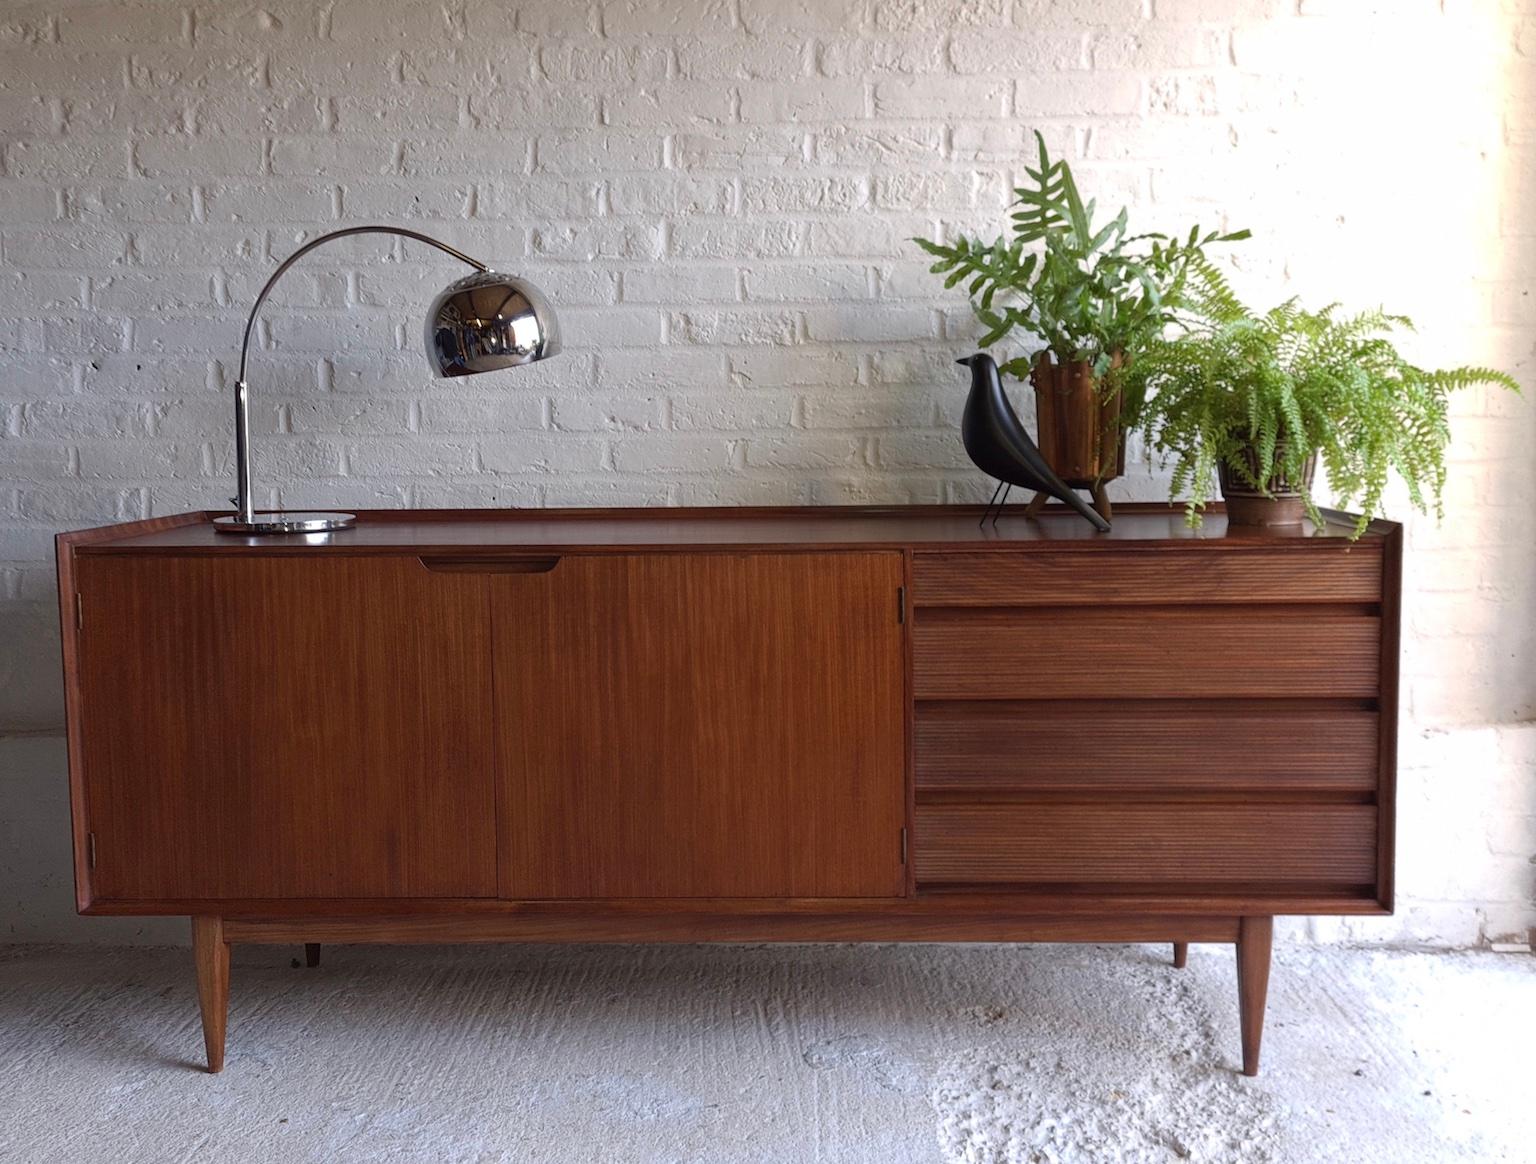 Midcentury Afromosia teak sideboard by Richard Hornby for Fyne Ladye, England, 1970s

Midcentury Afromosia teak sideboard by Richard Hornby for Fyne Ladye. Manufactured in the 1960s, from solid wood, 
and retailed through the renowned London